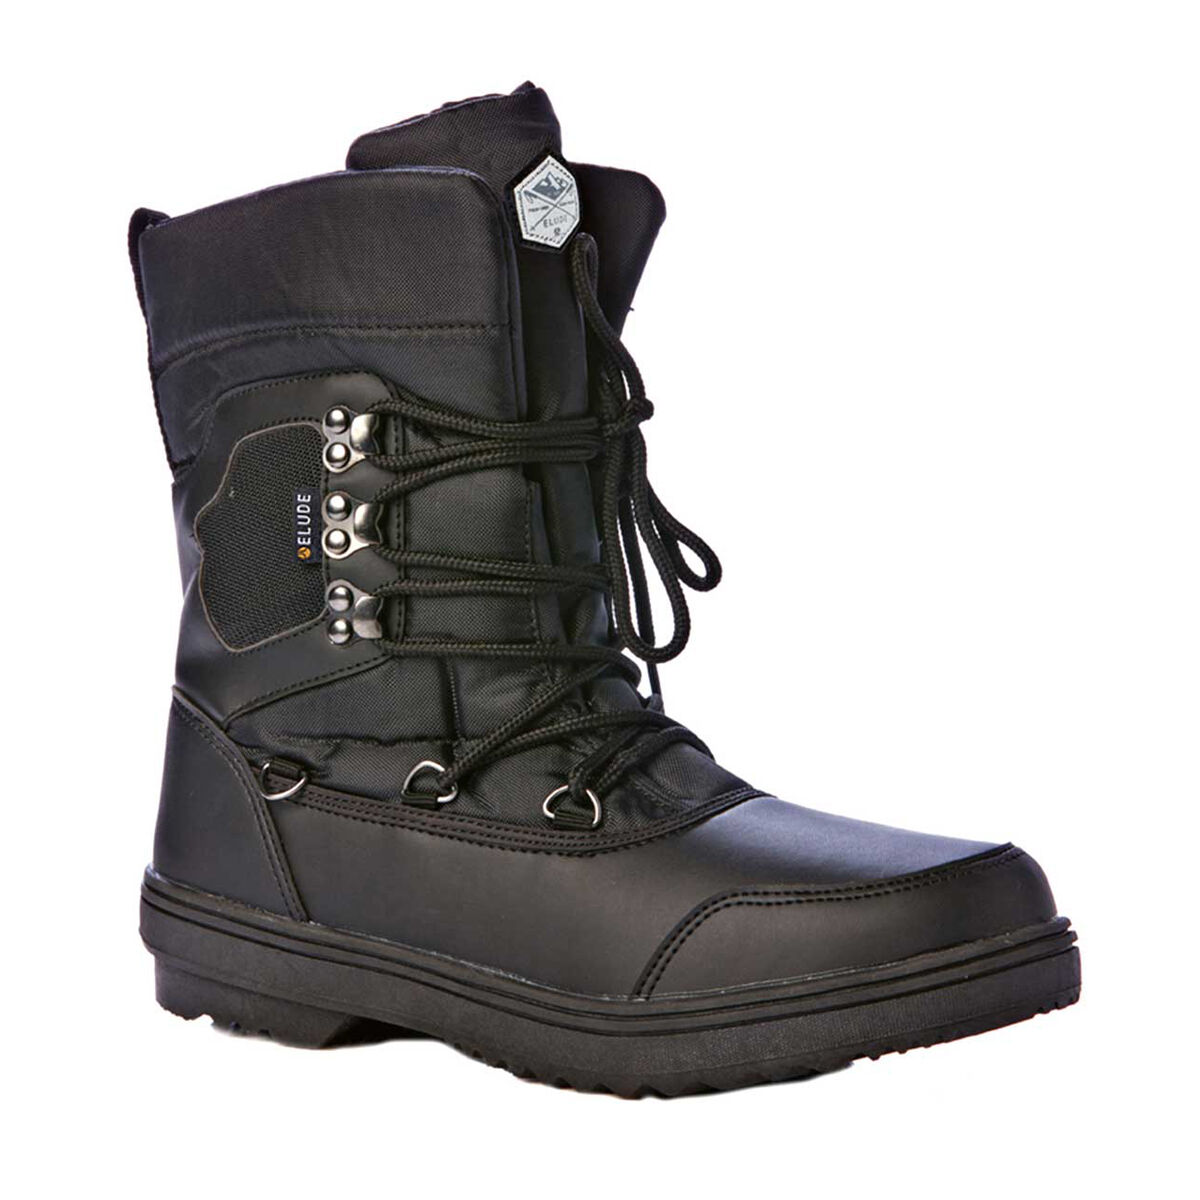 safety boots gumtree